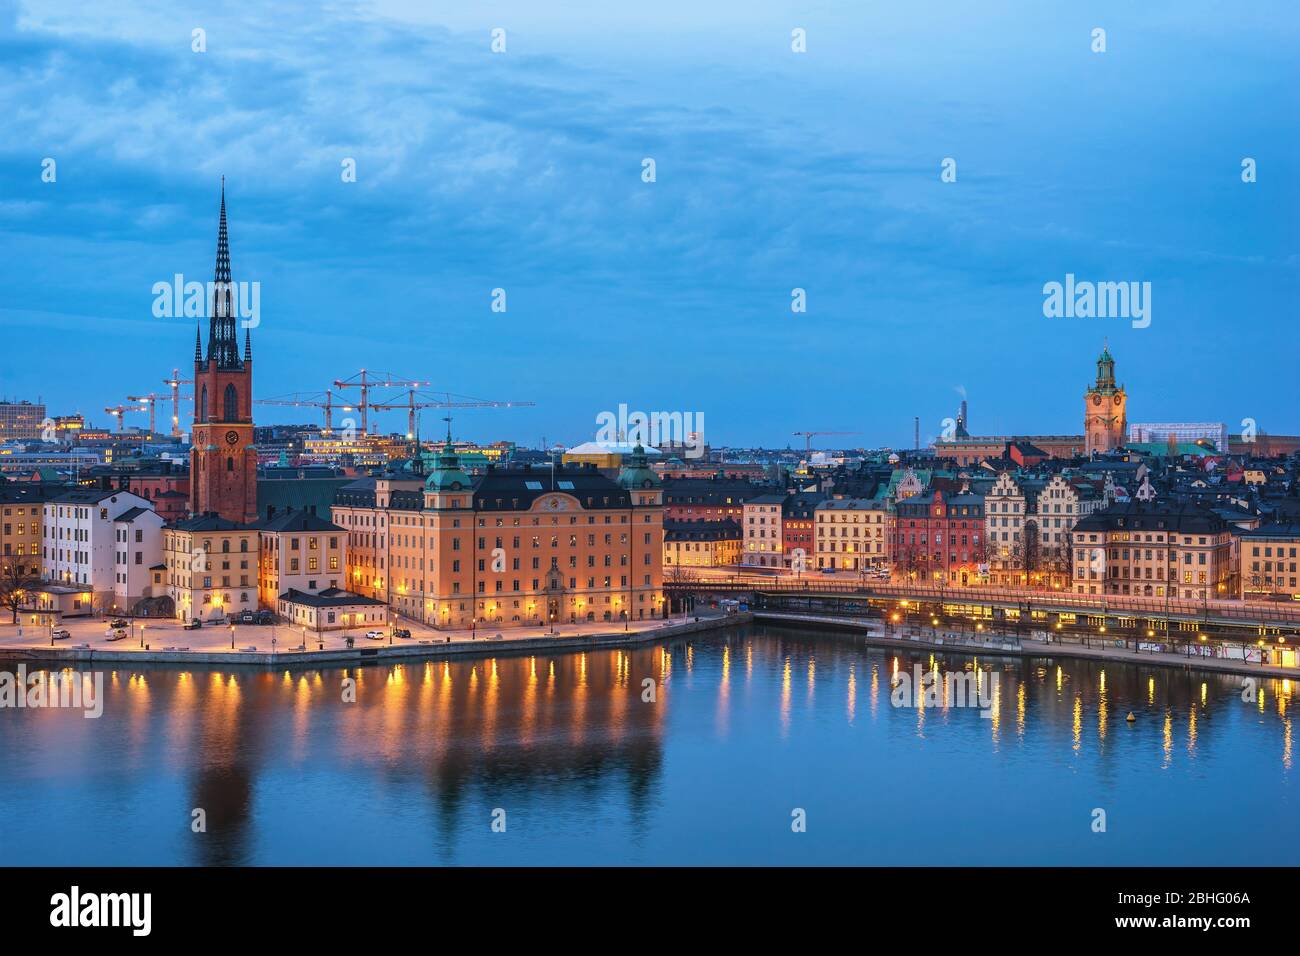 Stockholm Sweden, night city skyline at Gamla Stan old town Stock Photo